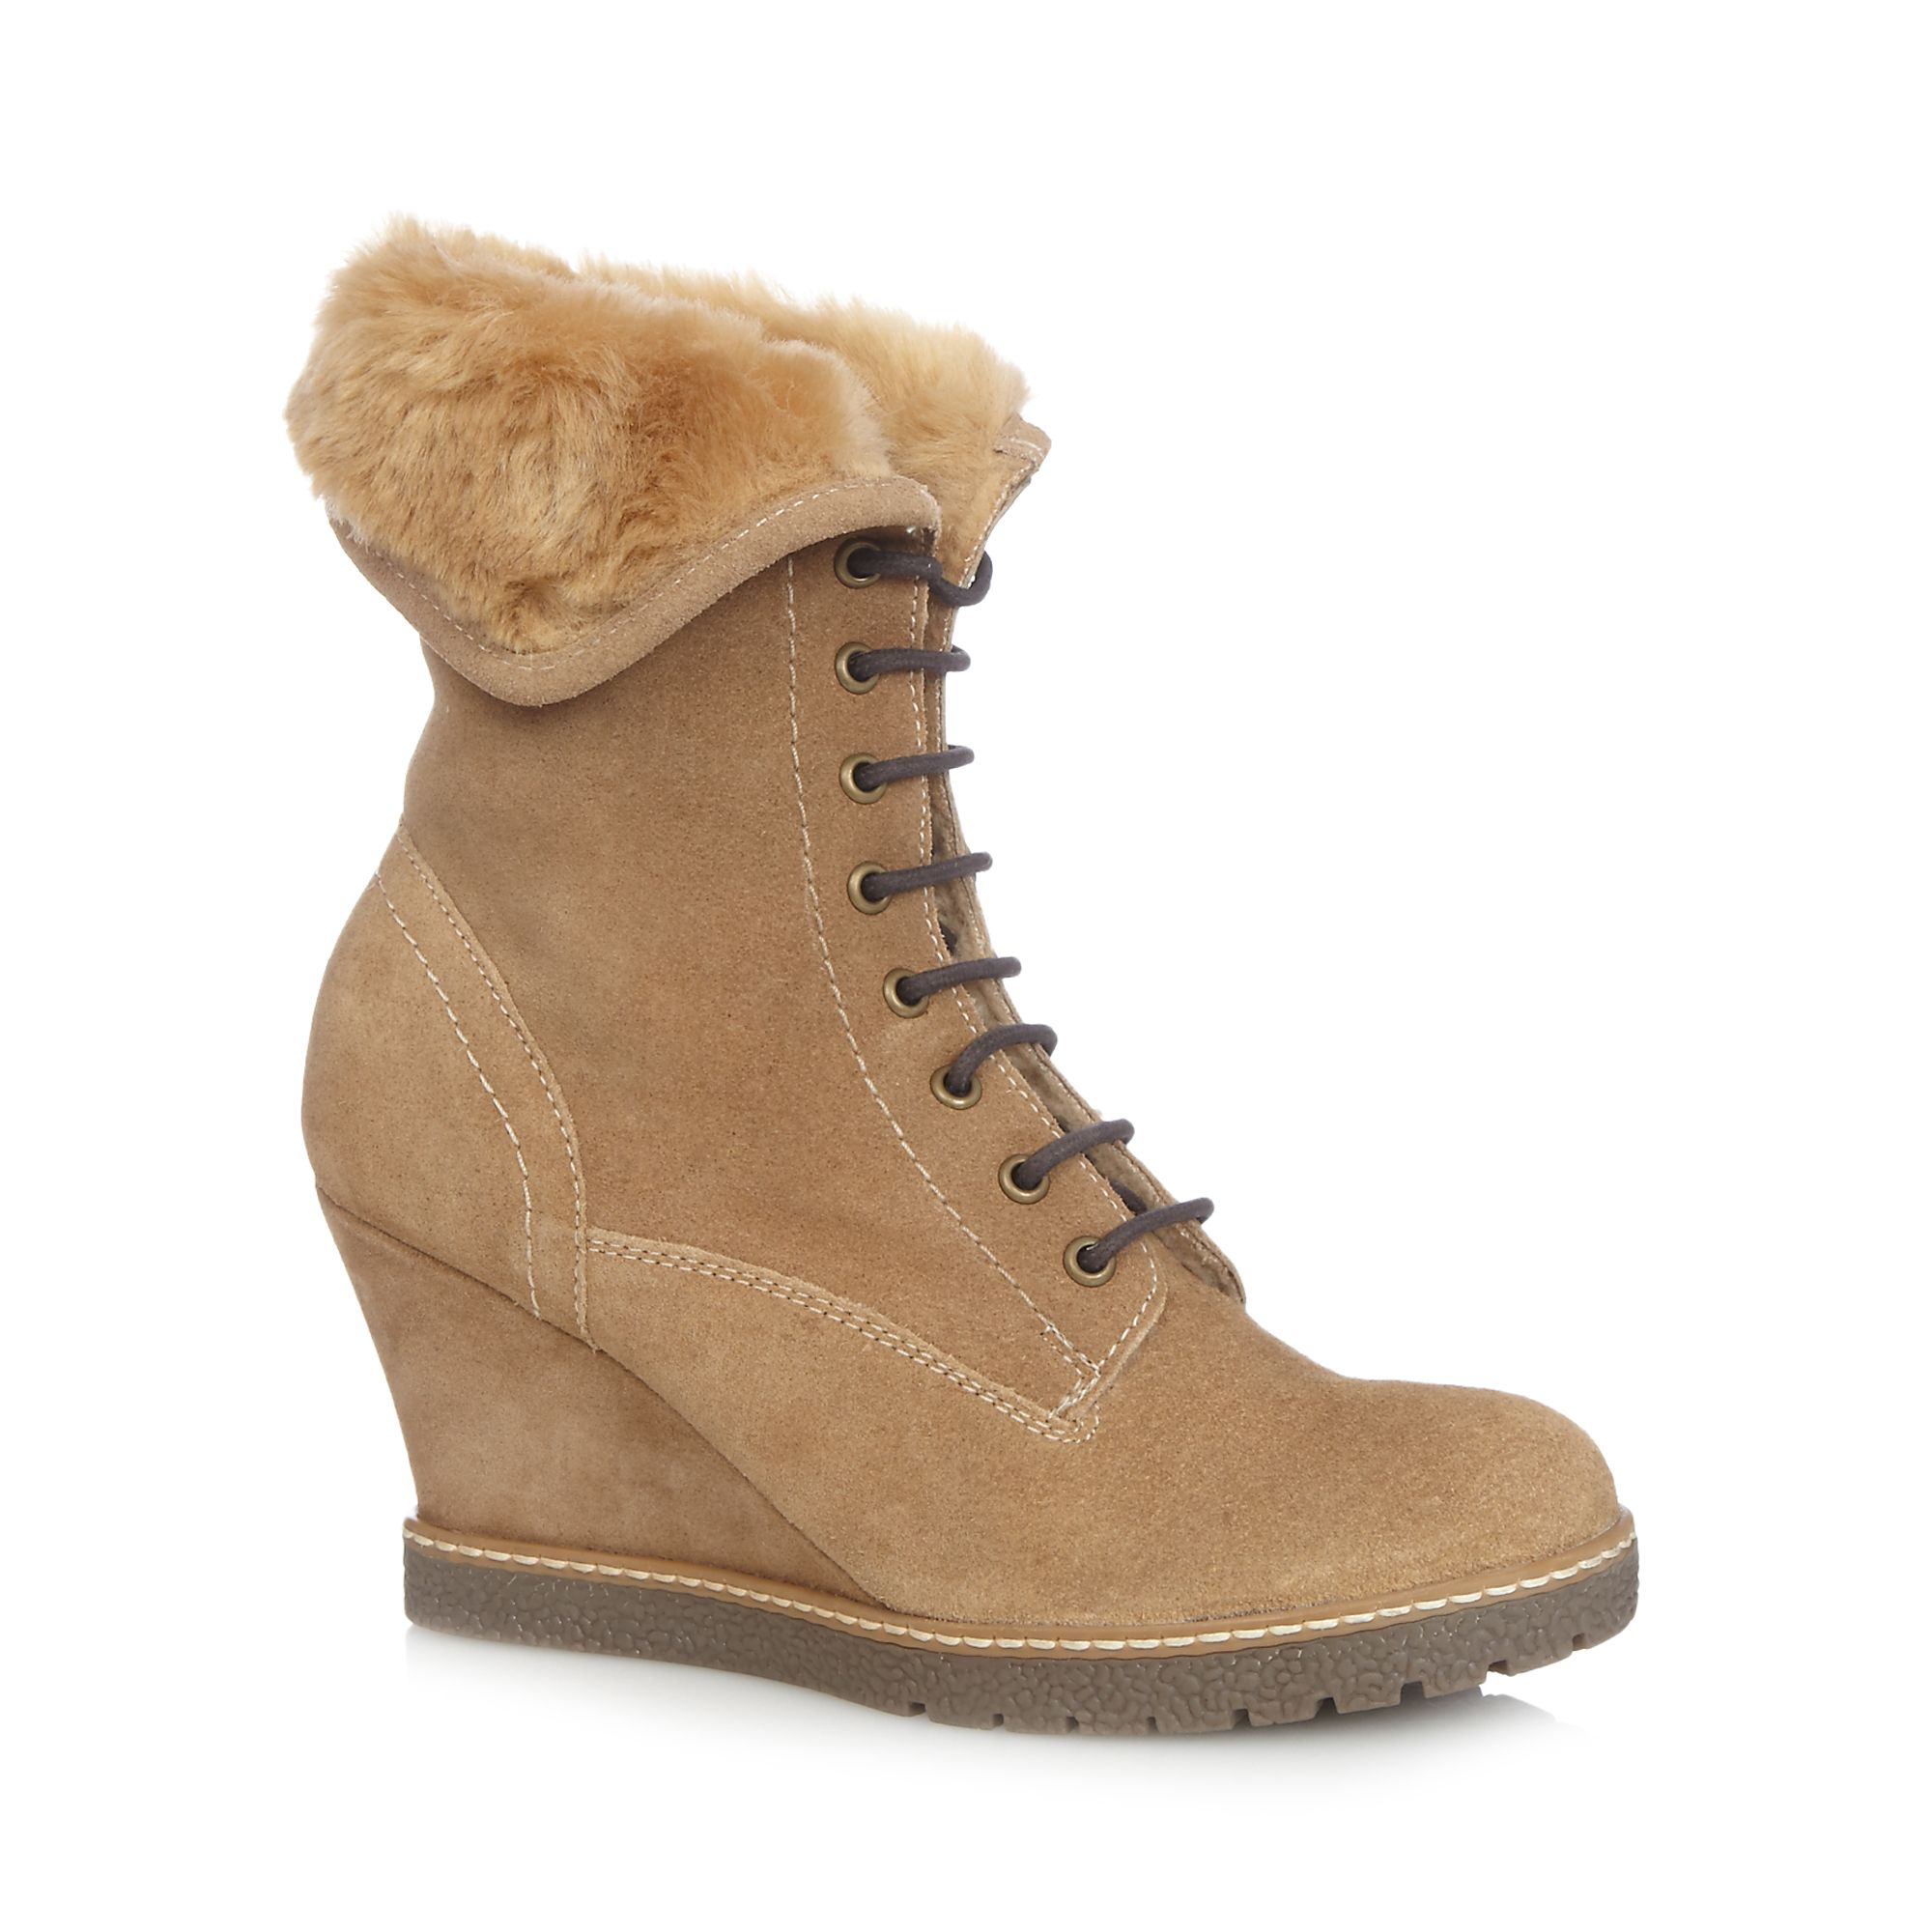 Mantaray Womens Tan Faux Fur Cuff Suede Wedge Ankle Boots From ...